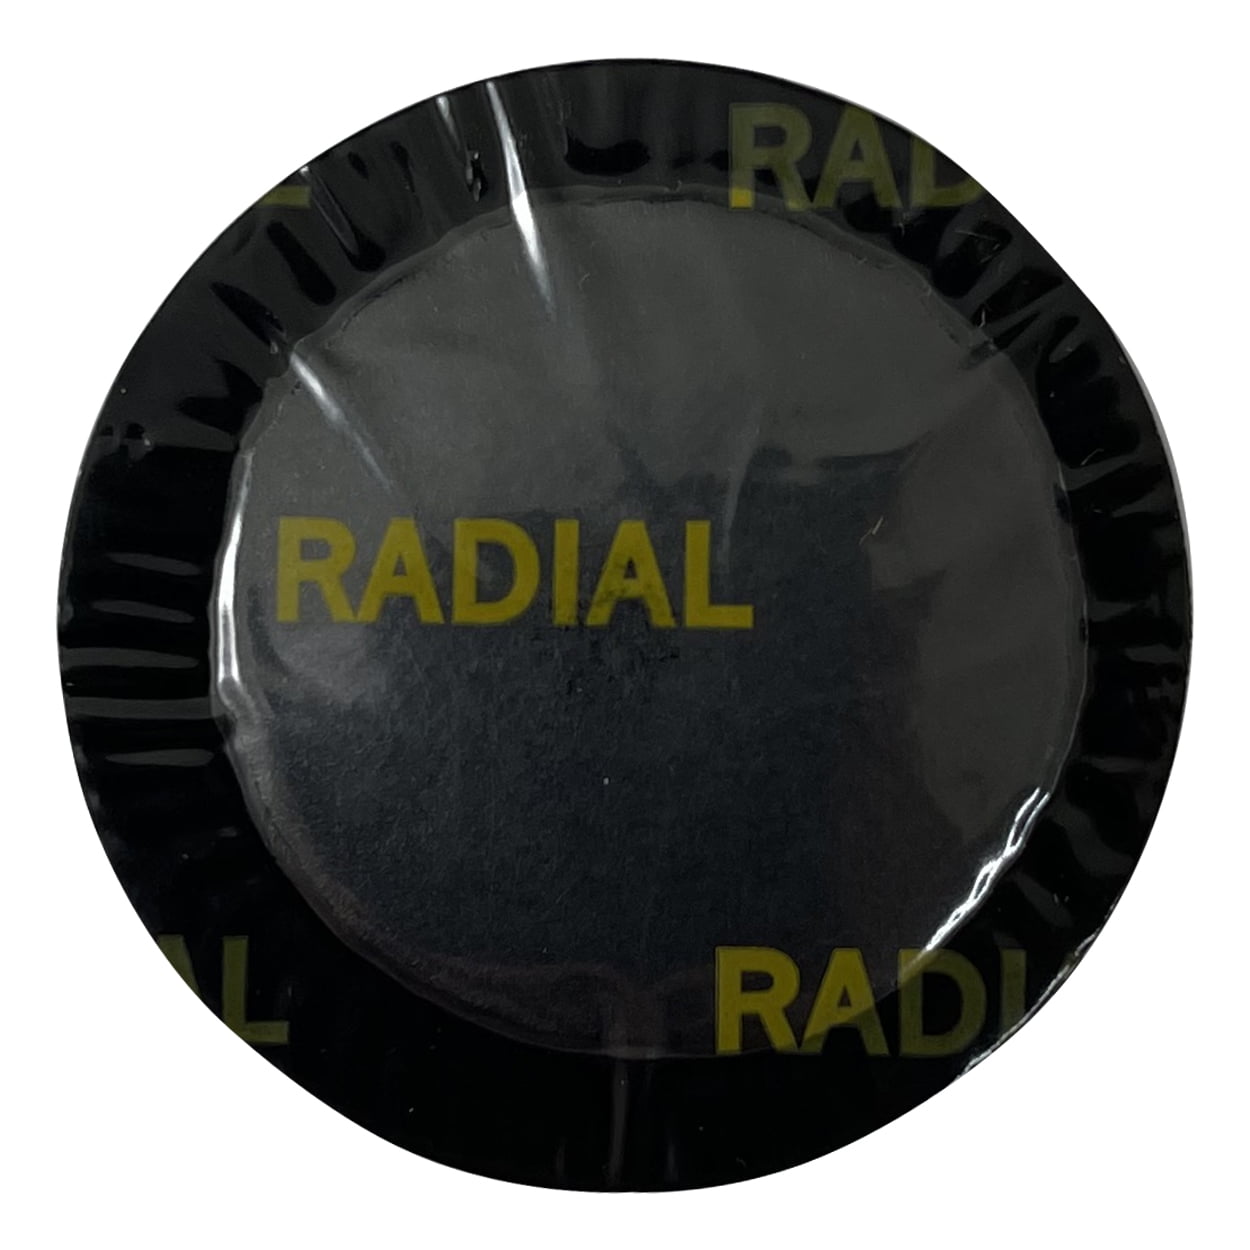 1000 55 MM USA Double Rubber Radial Tire Repair Patch Medium Round 2 1/2" 